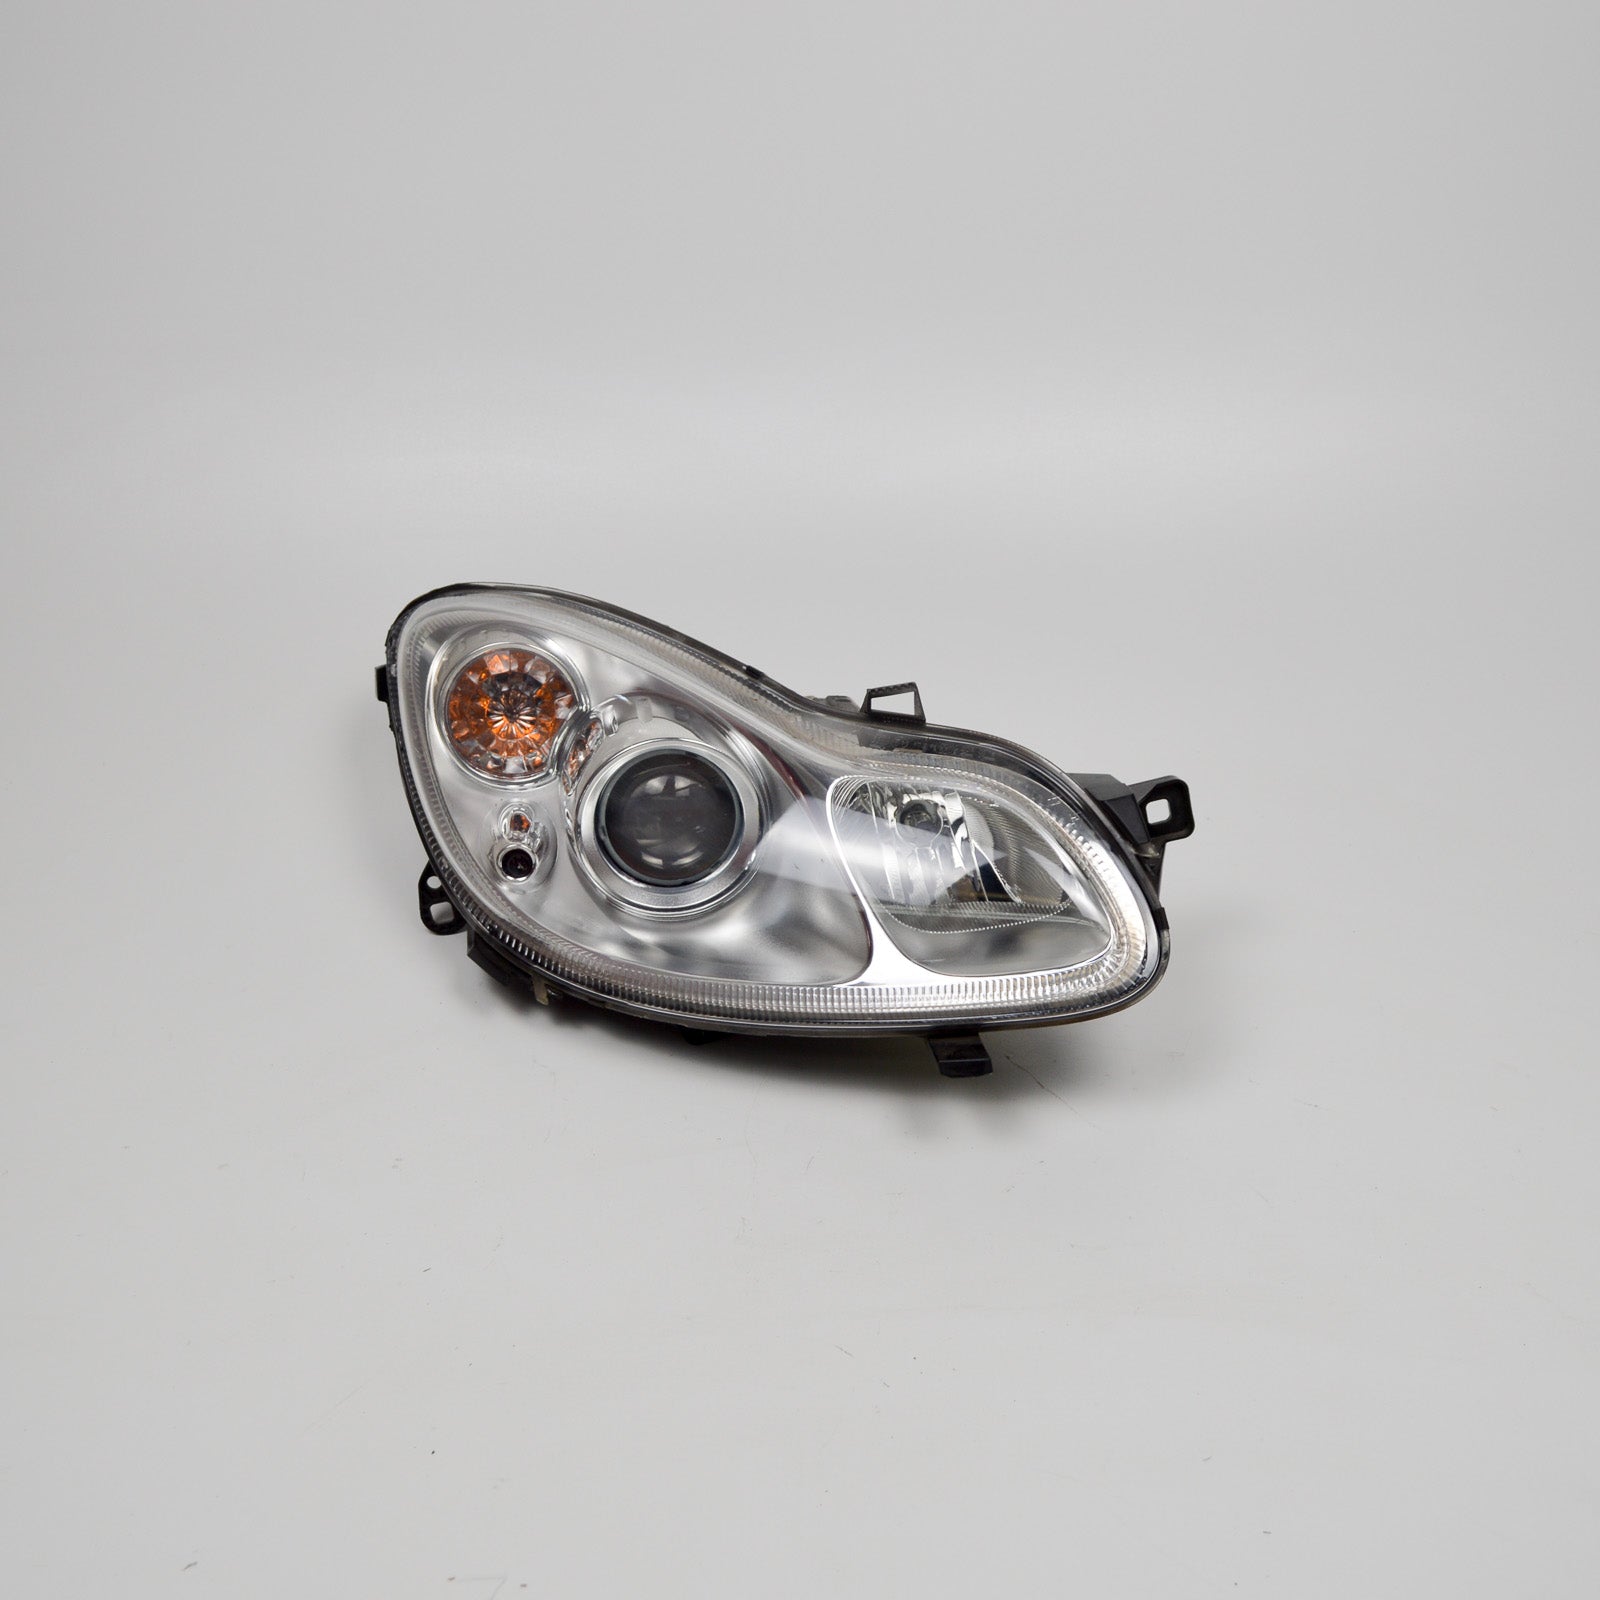 Smart Fortwo 451 headlight with servo motor on the right